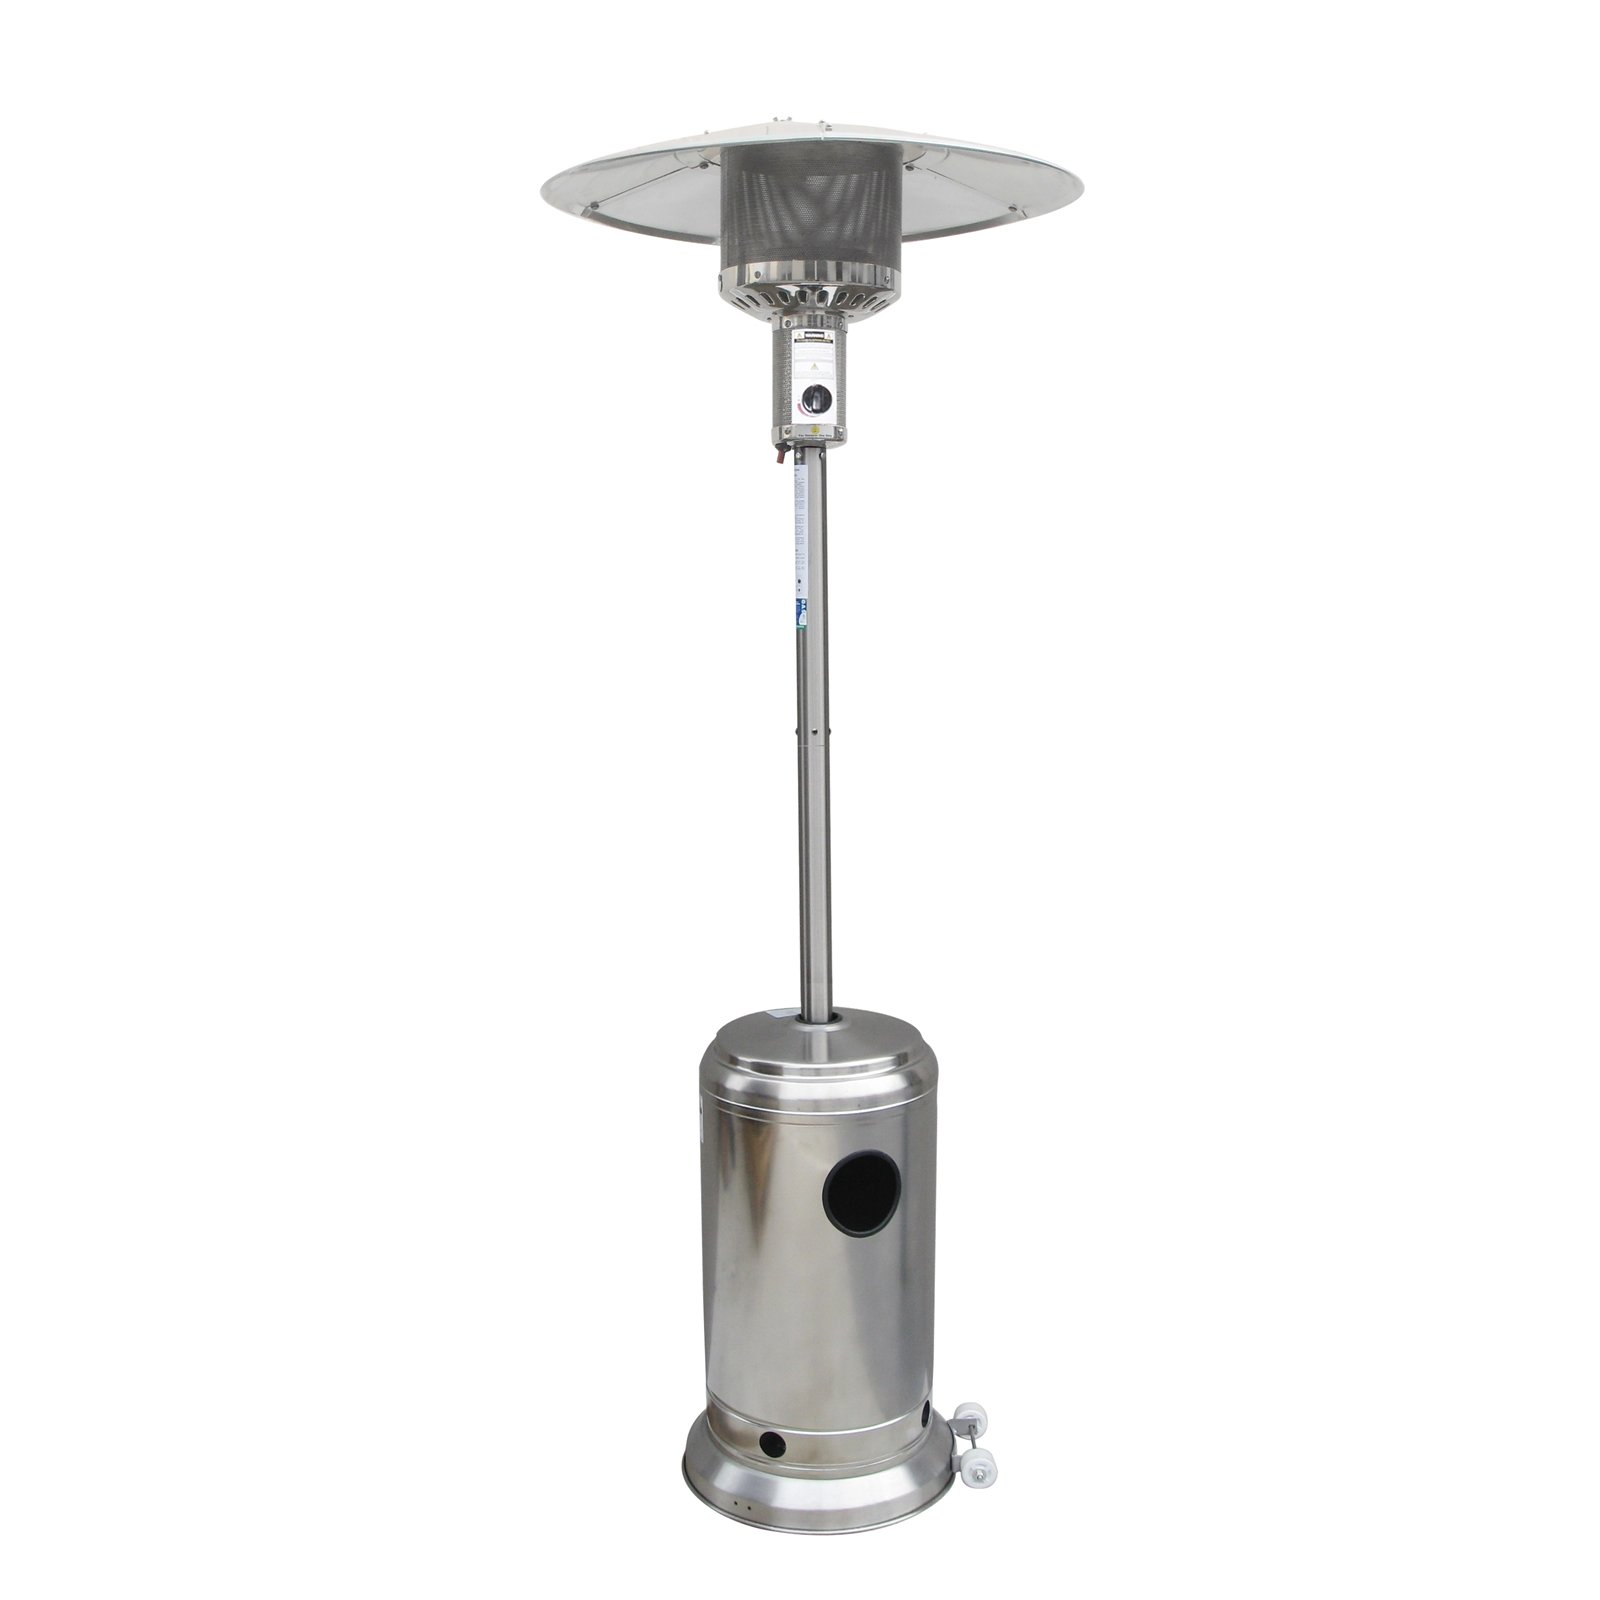 Details About Fiammetta Stainless Steel Gas Patio Heater Outdoor At Bunnings Warehouse throughout measurements 1600 X 1600